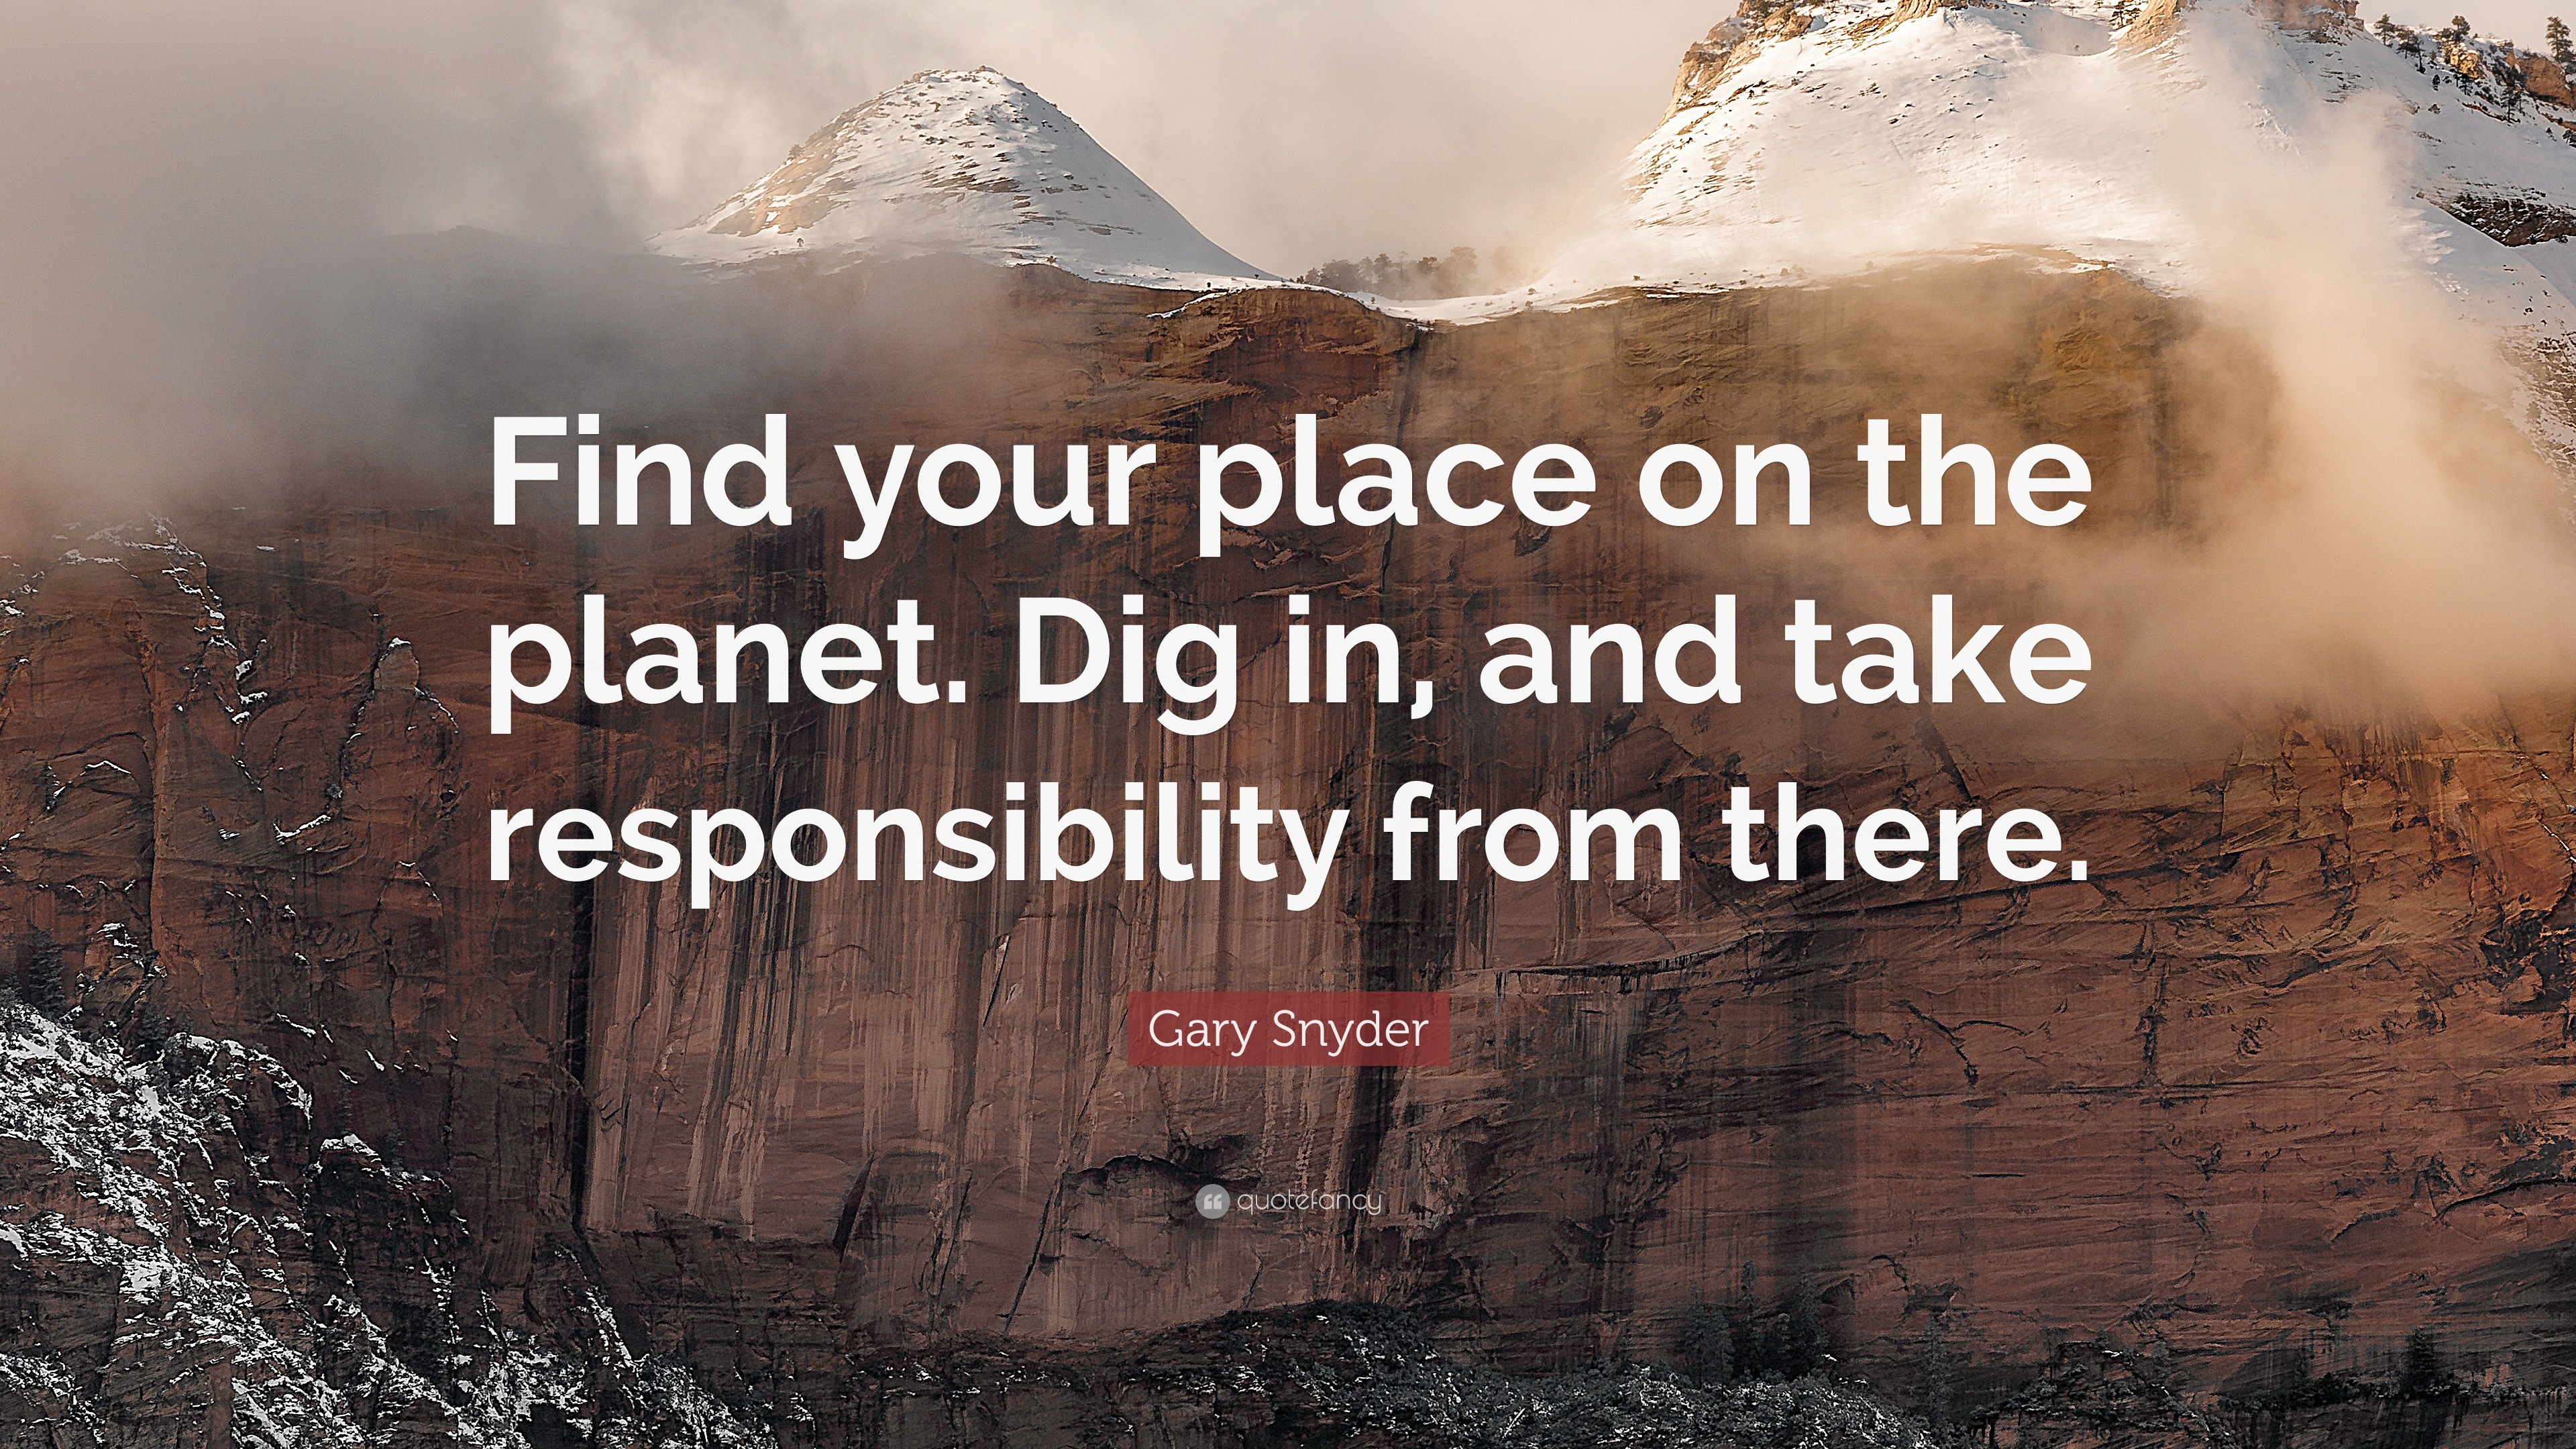 Gary Snyder Quote “Find your place on the Dig in, and take